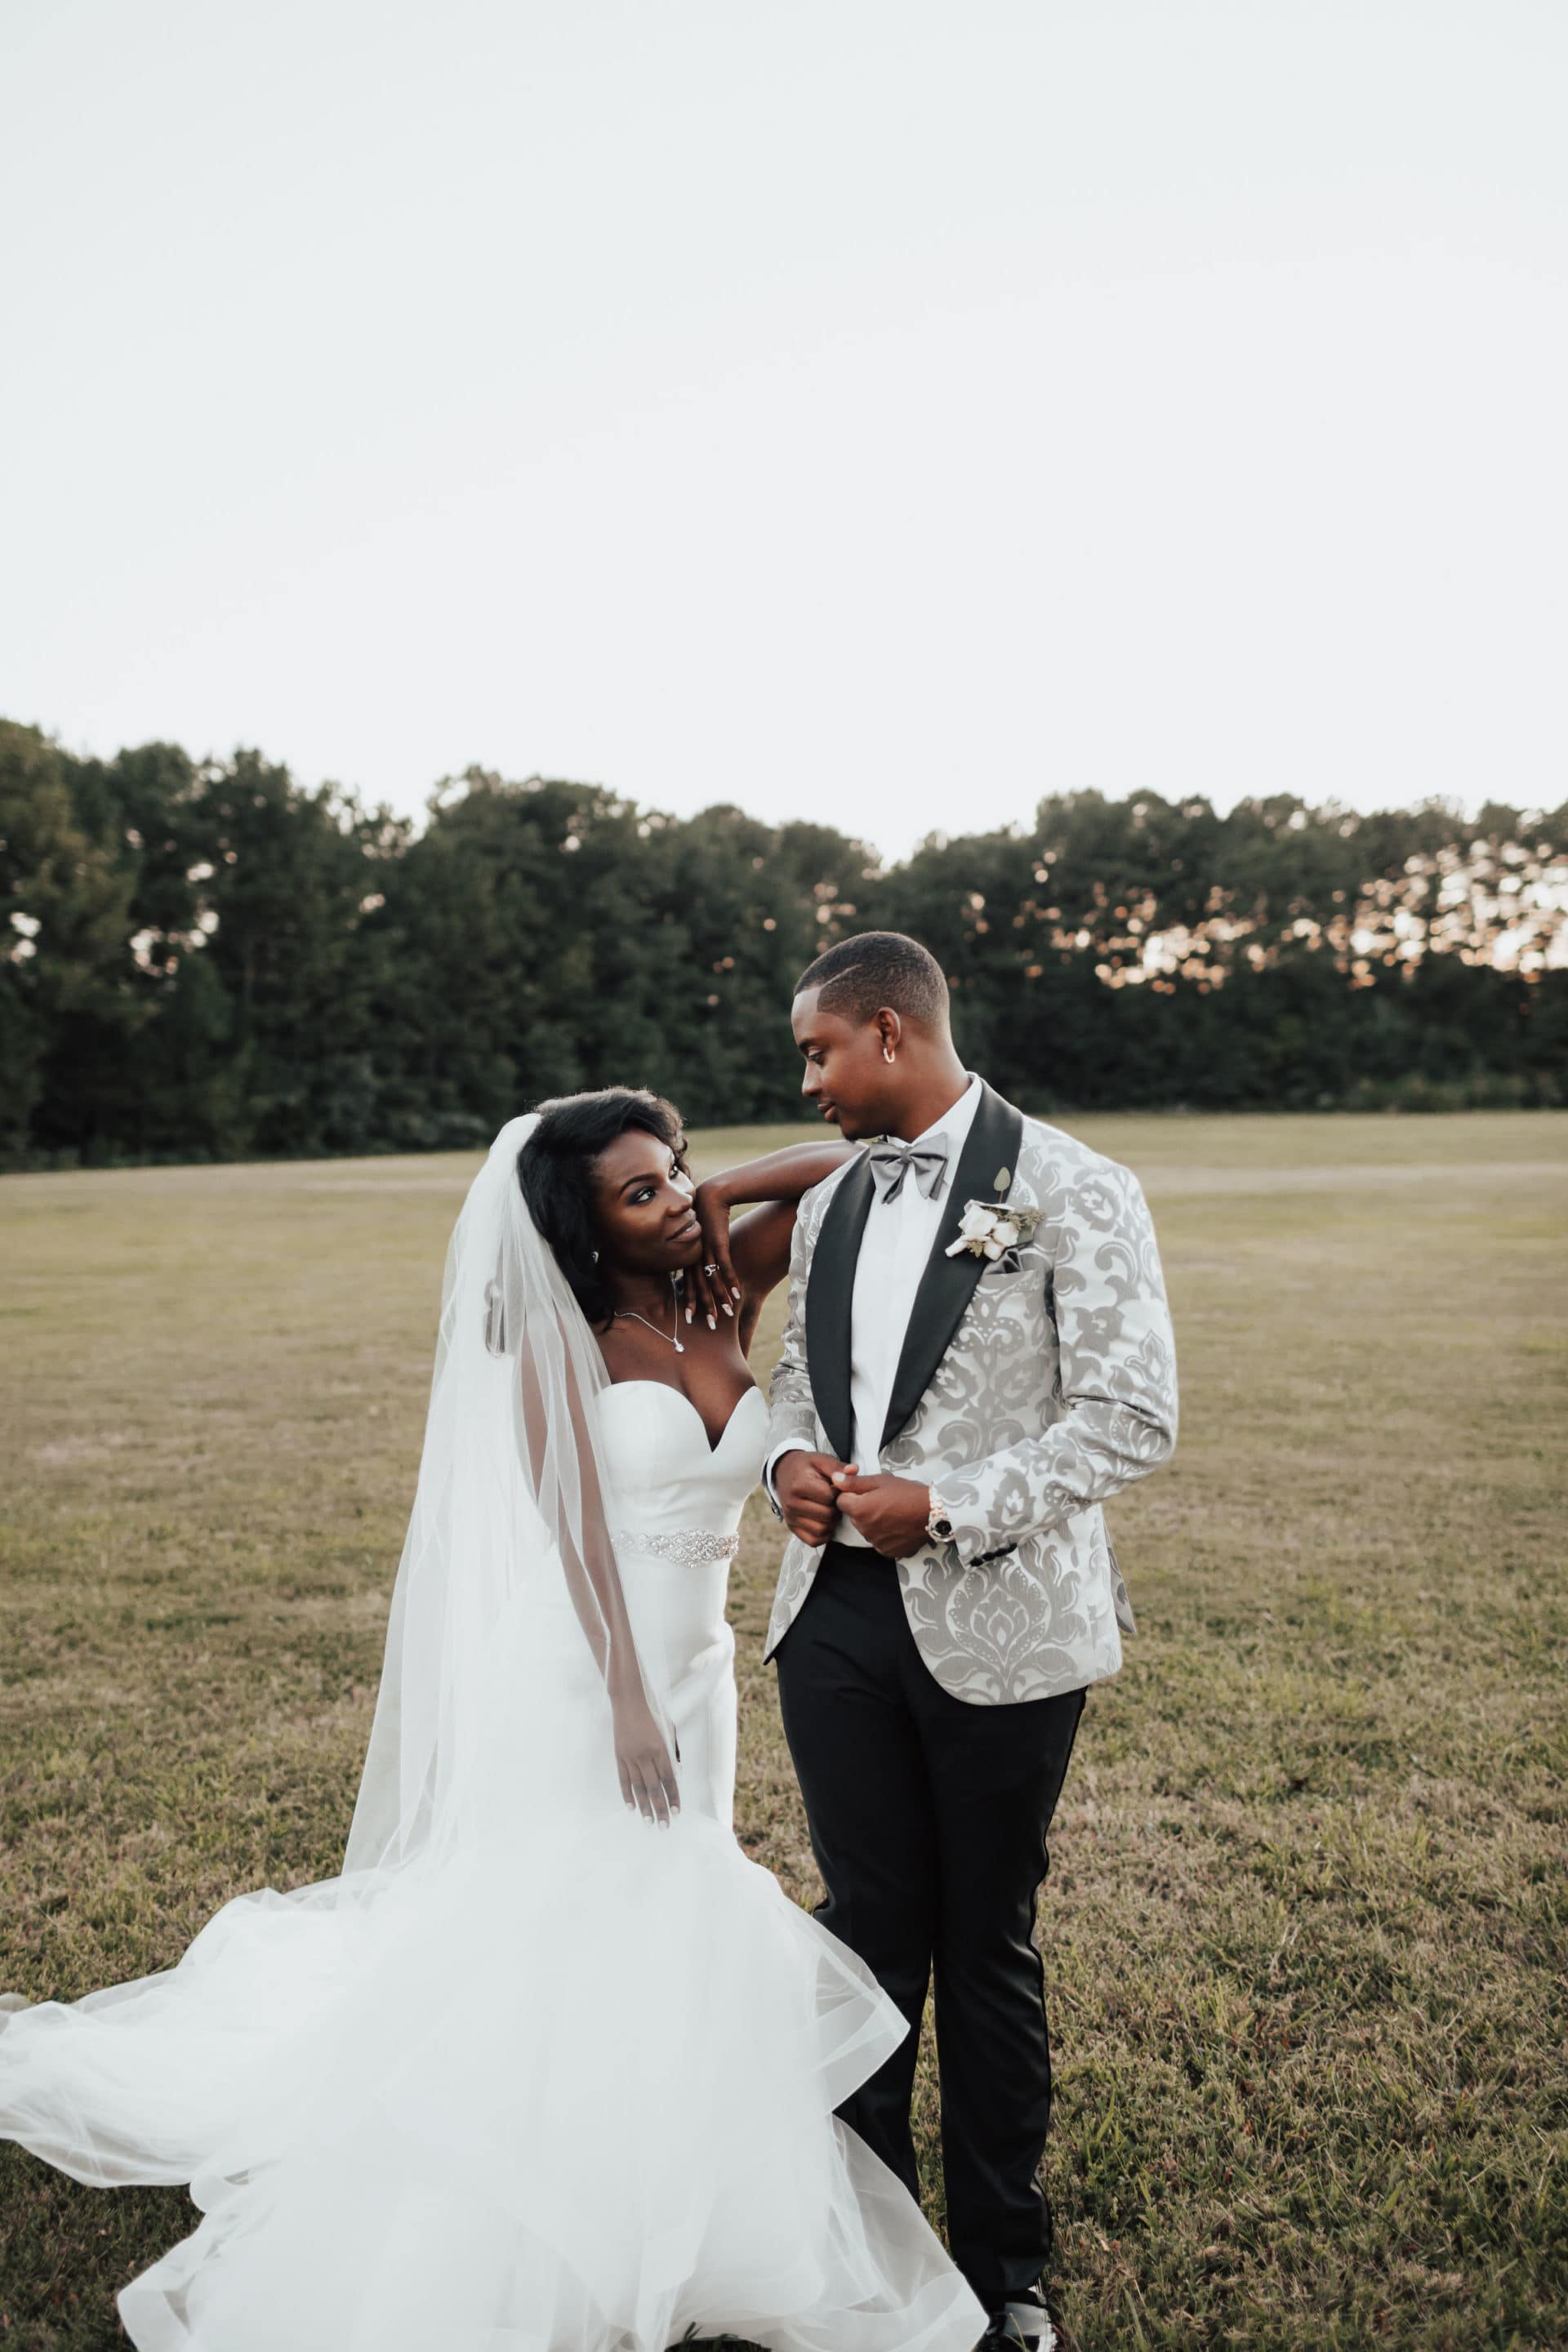 Bridal Bliss: Nia and Javon's Loyal Tribe Helped Them Pull Off Their Dream Wedding In Atlanta